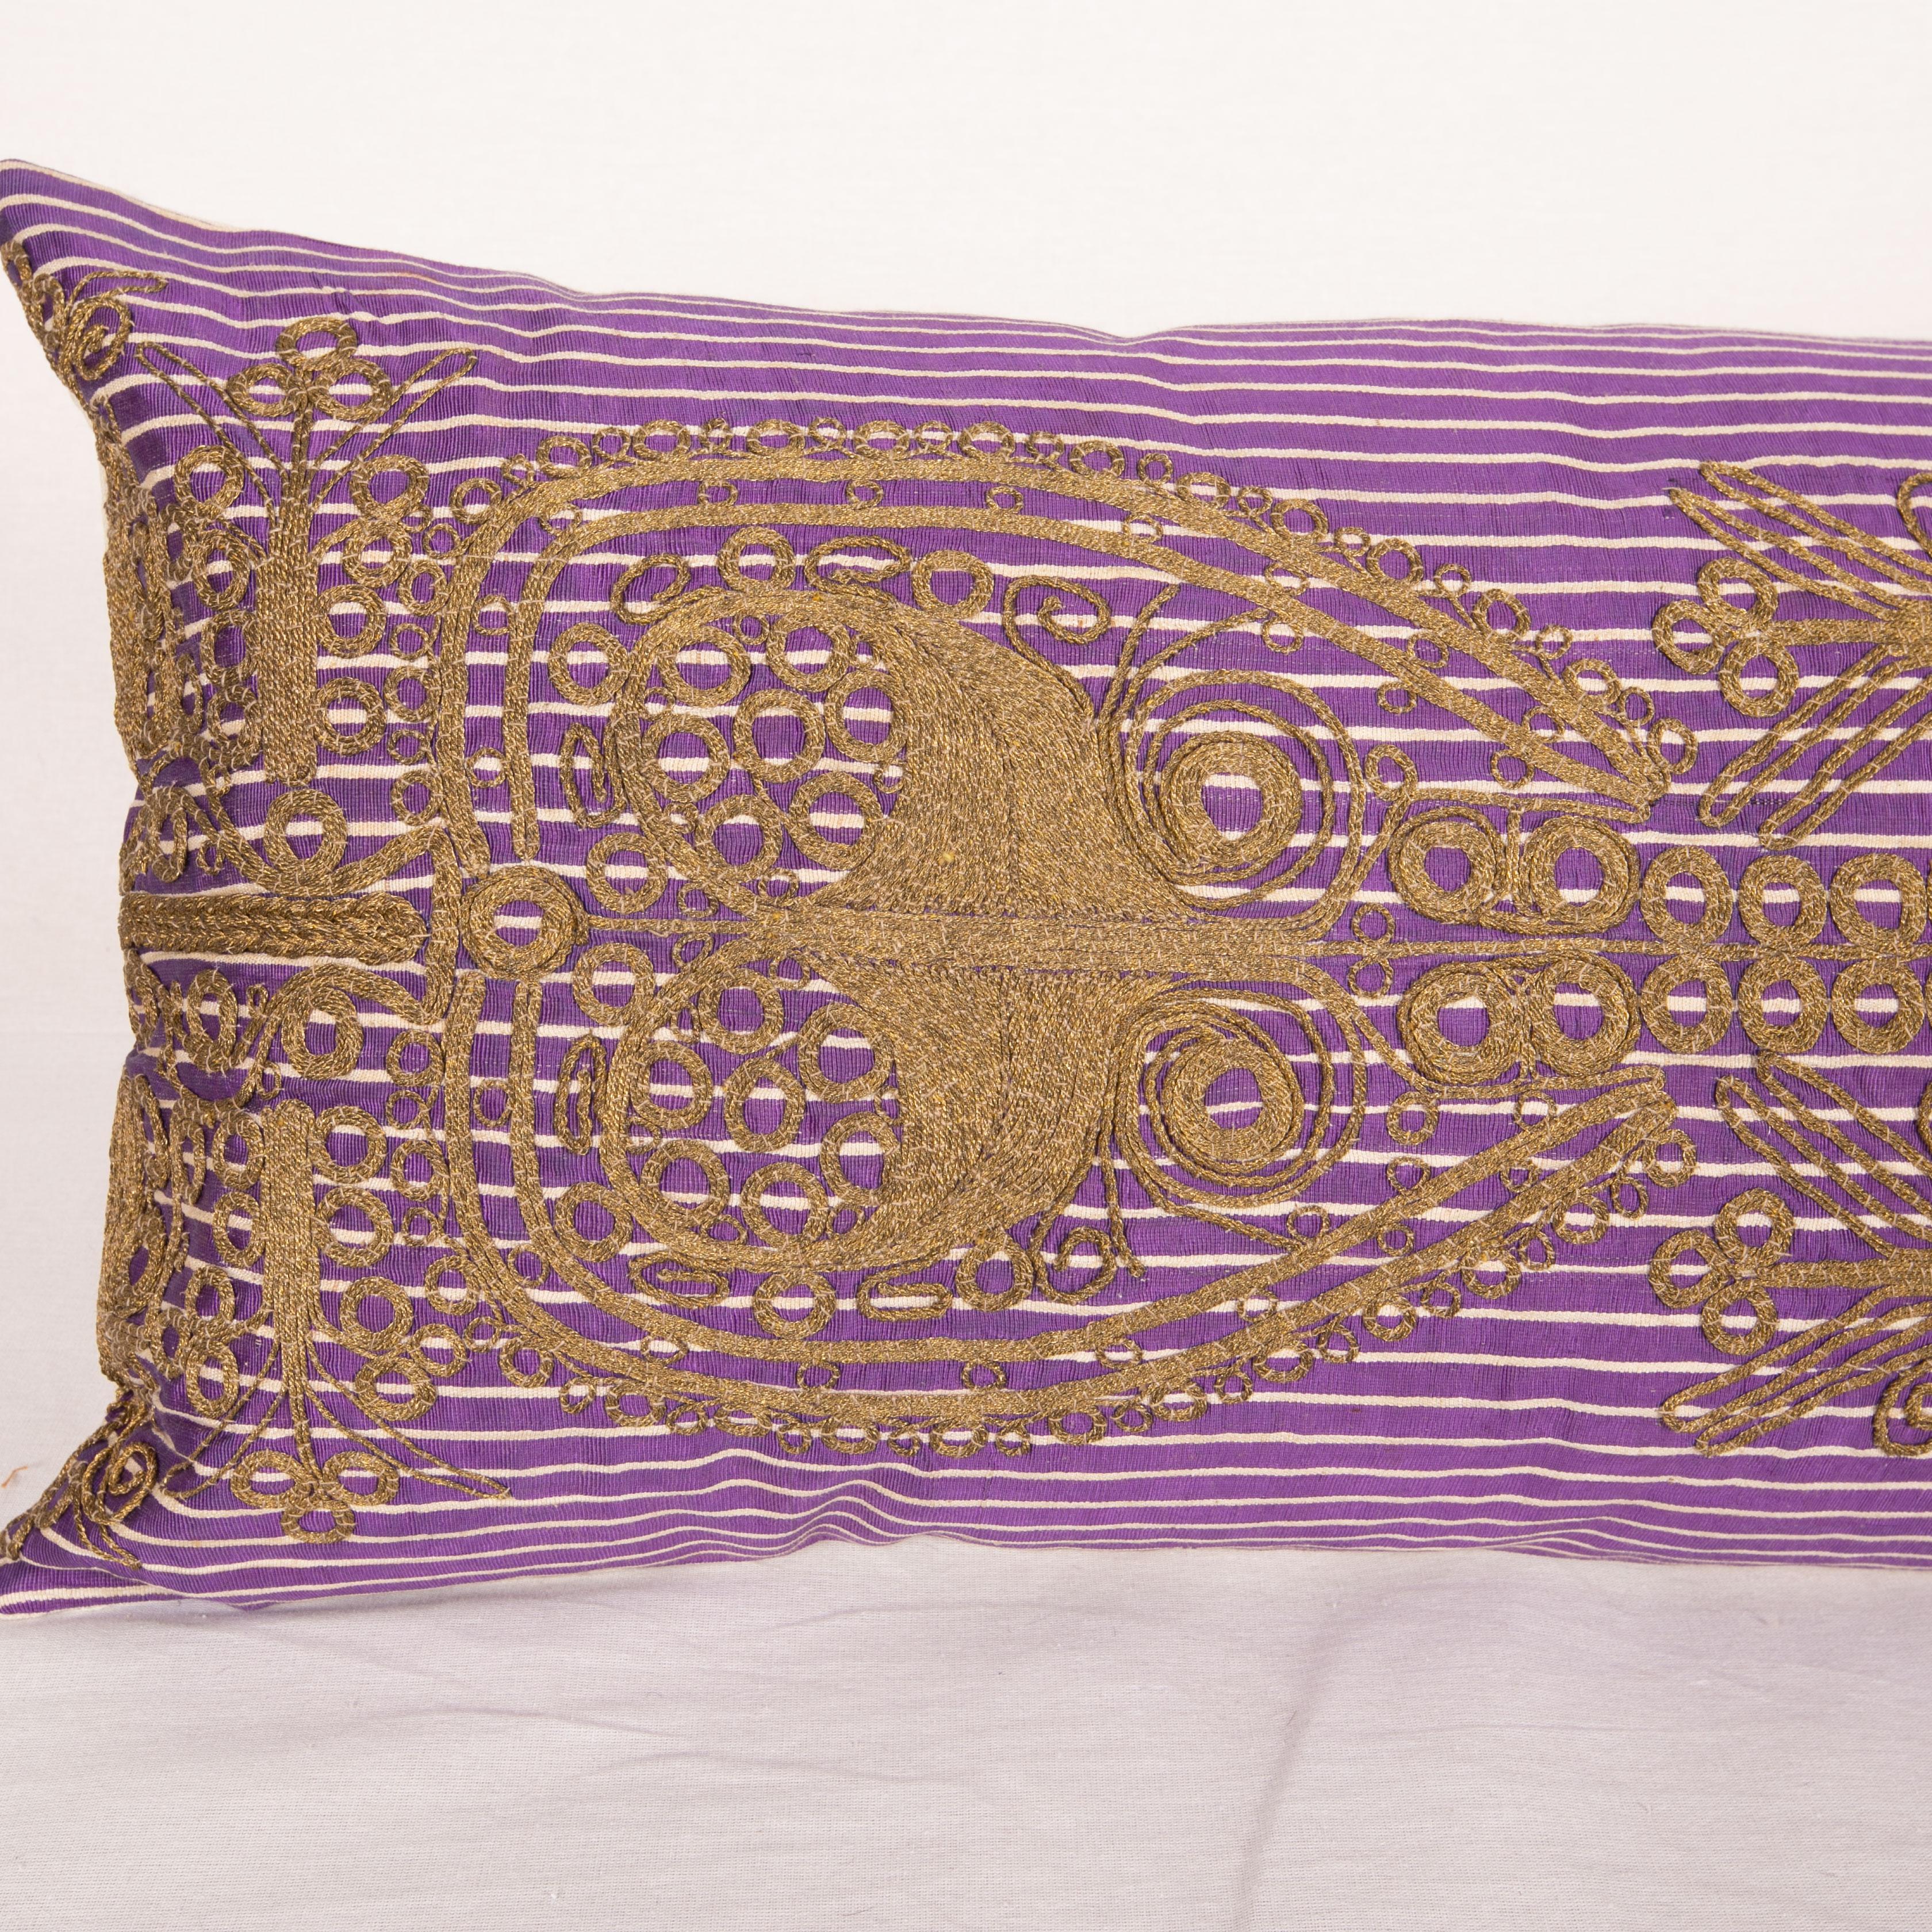 Islamic Antique Ottoman Turkish Pillow Case, Early 20th C.